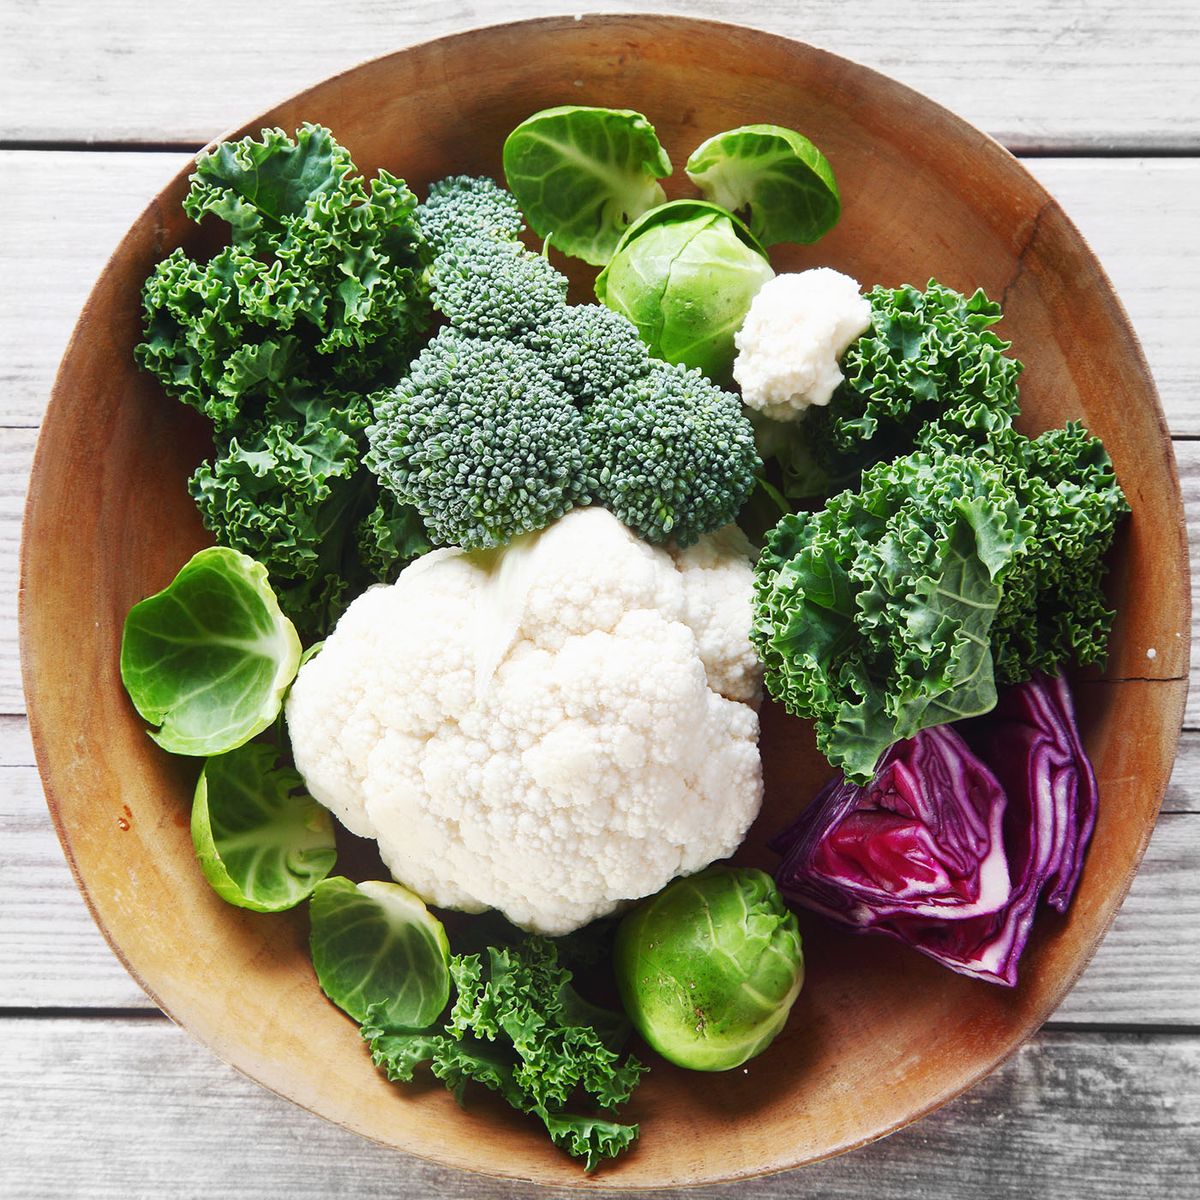 Healthy,Fresh,Broccoli,,Cauliflower,And,Cabbage,Vegetables,On,Wooden,Bowl,